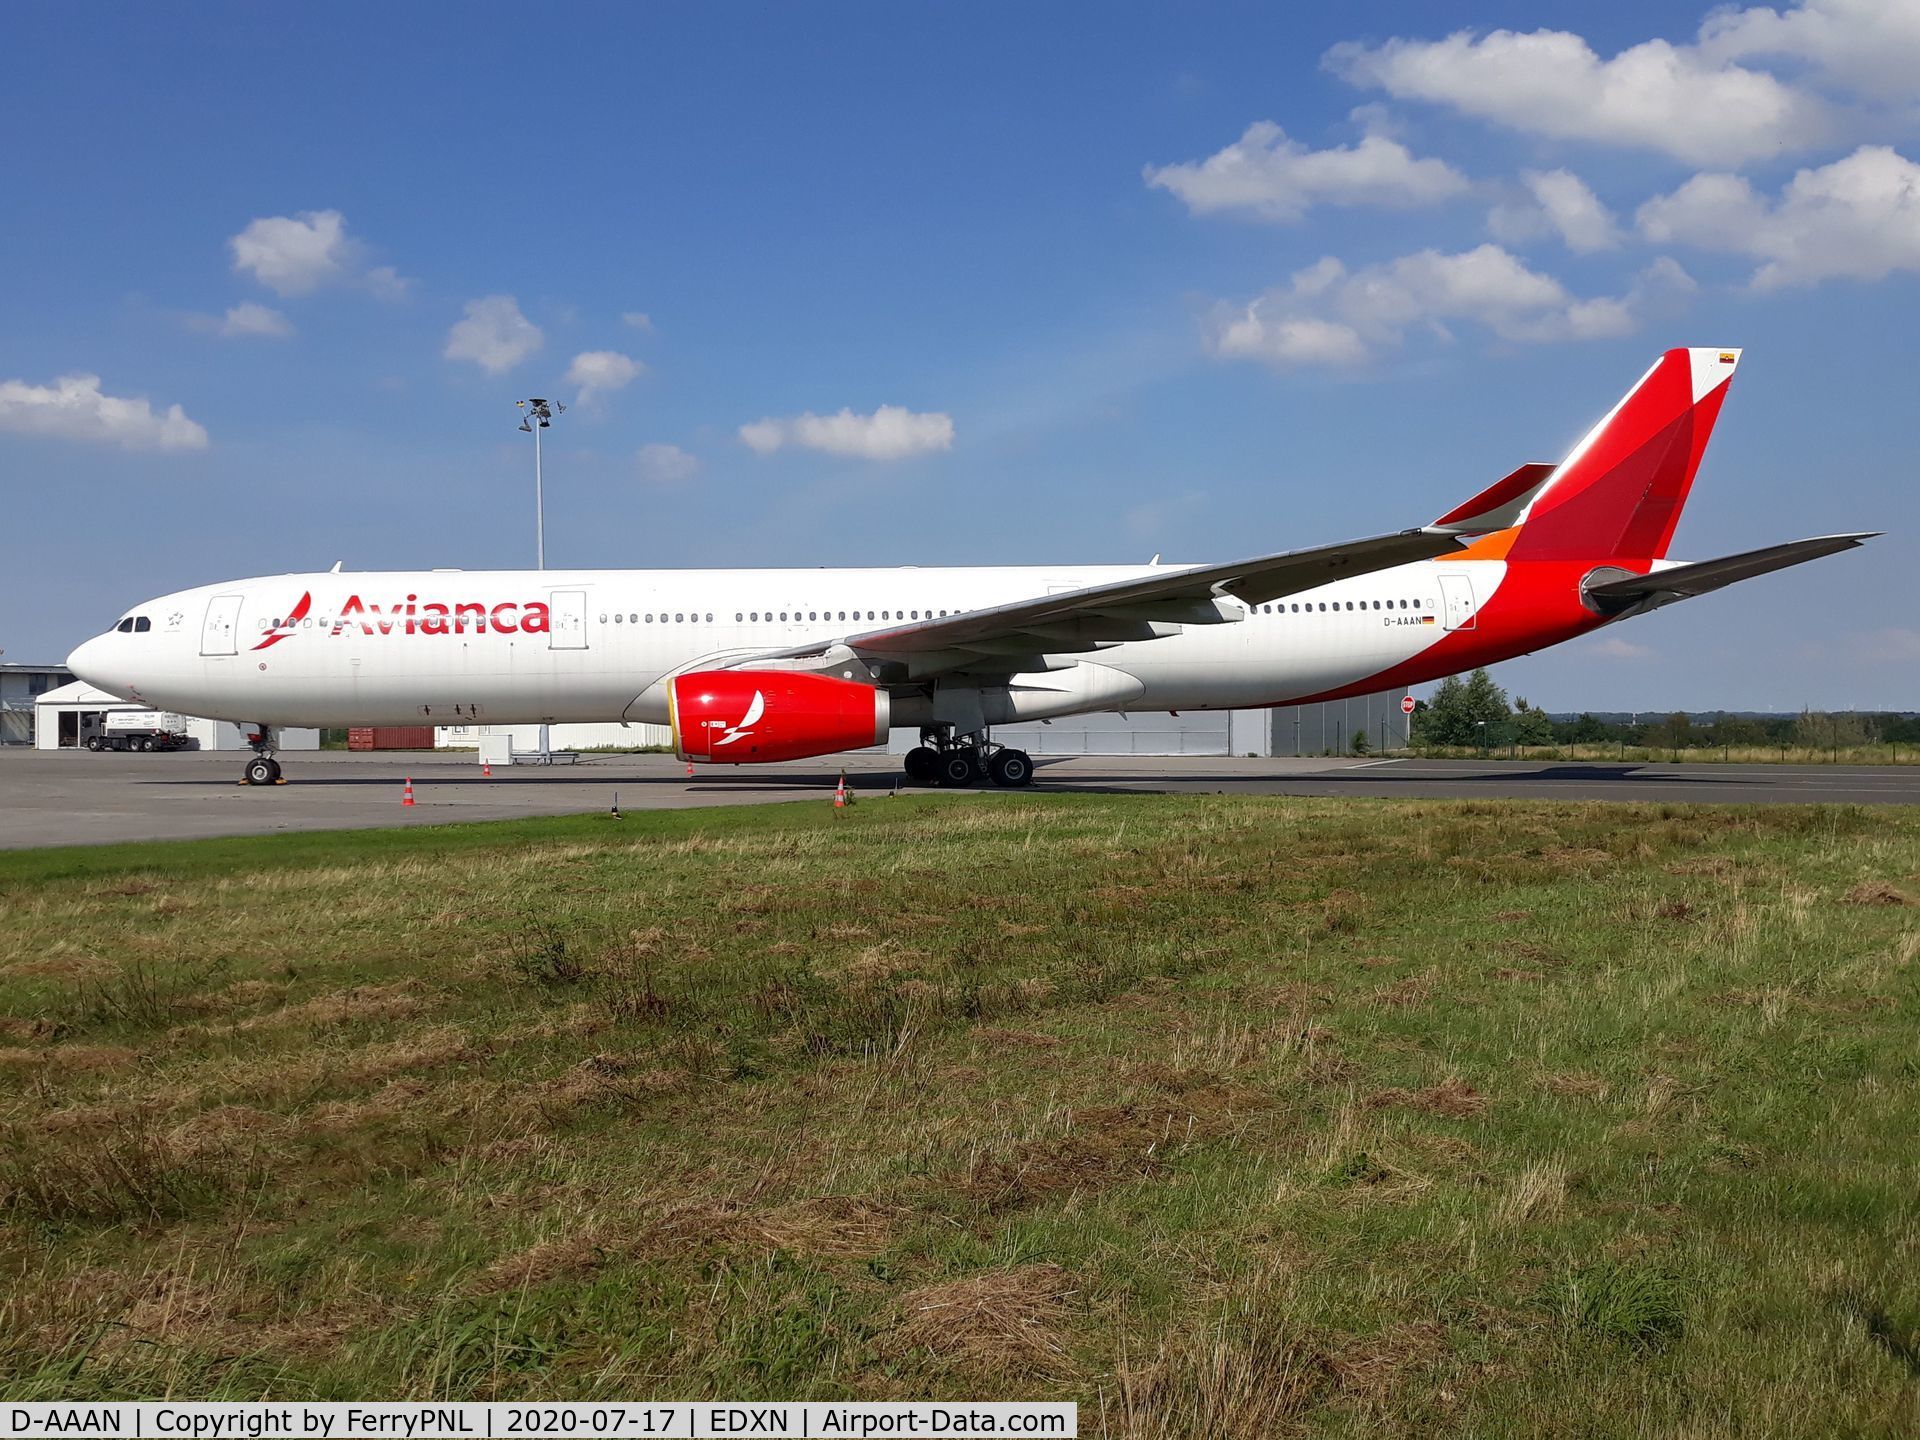 D-AAAN, 2012 Airbus A330-343 C/N 1357, Ex Avianca A333 stored in Cuxhafen, Northern Germany